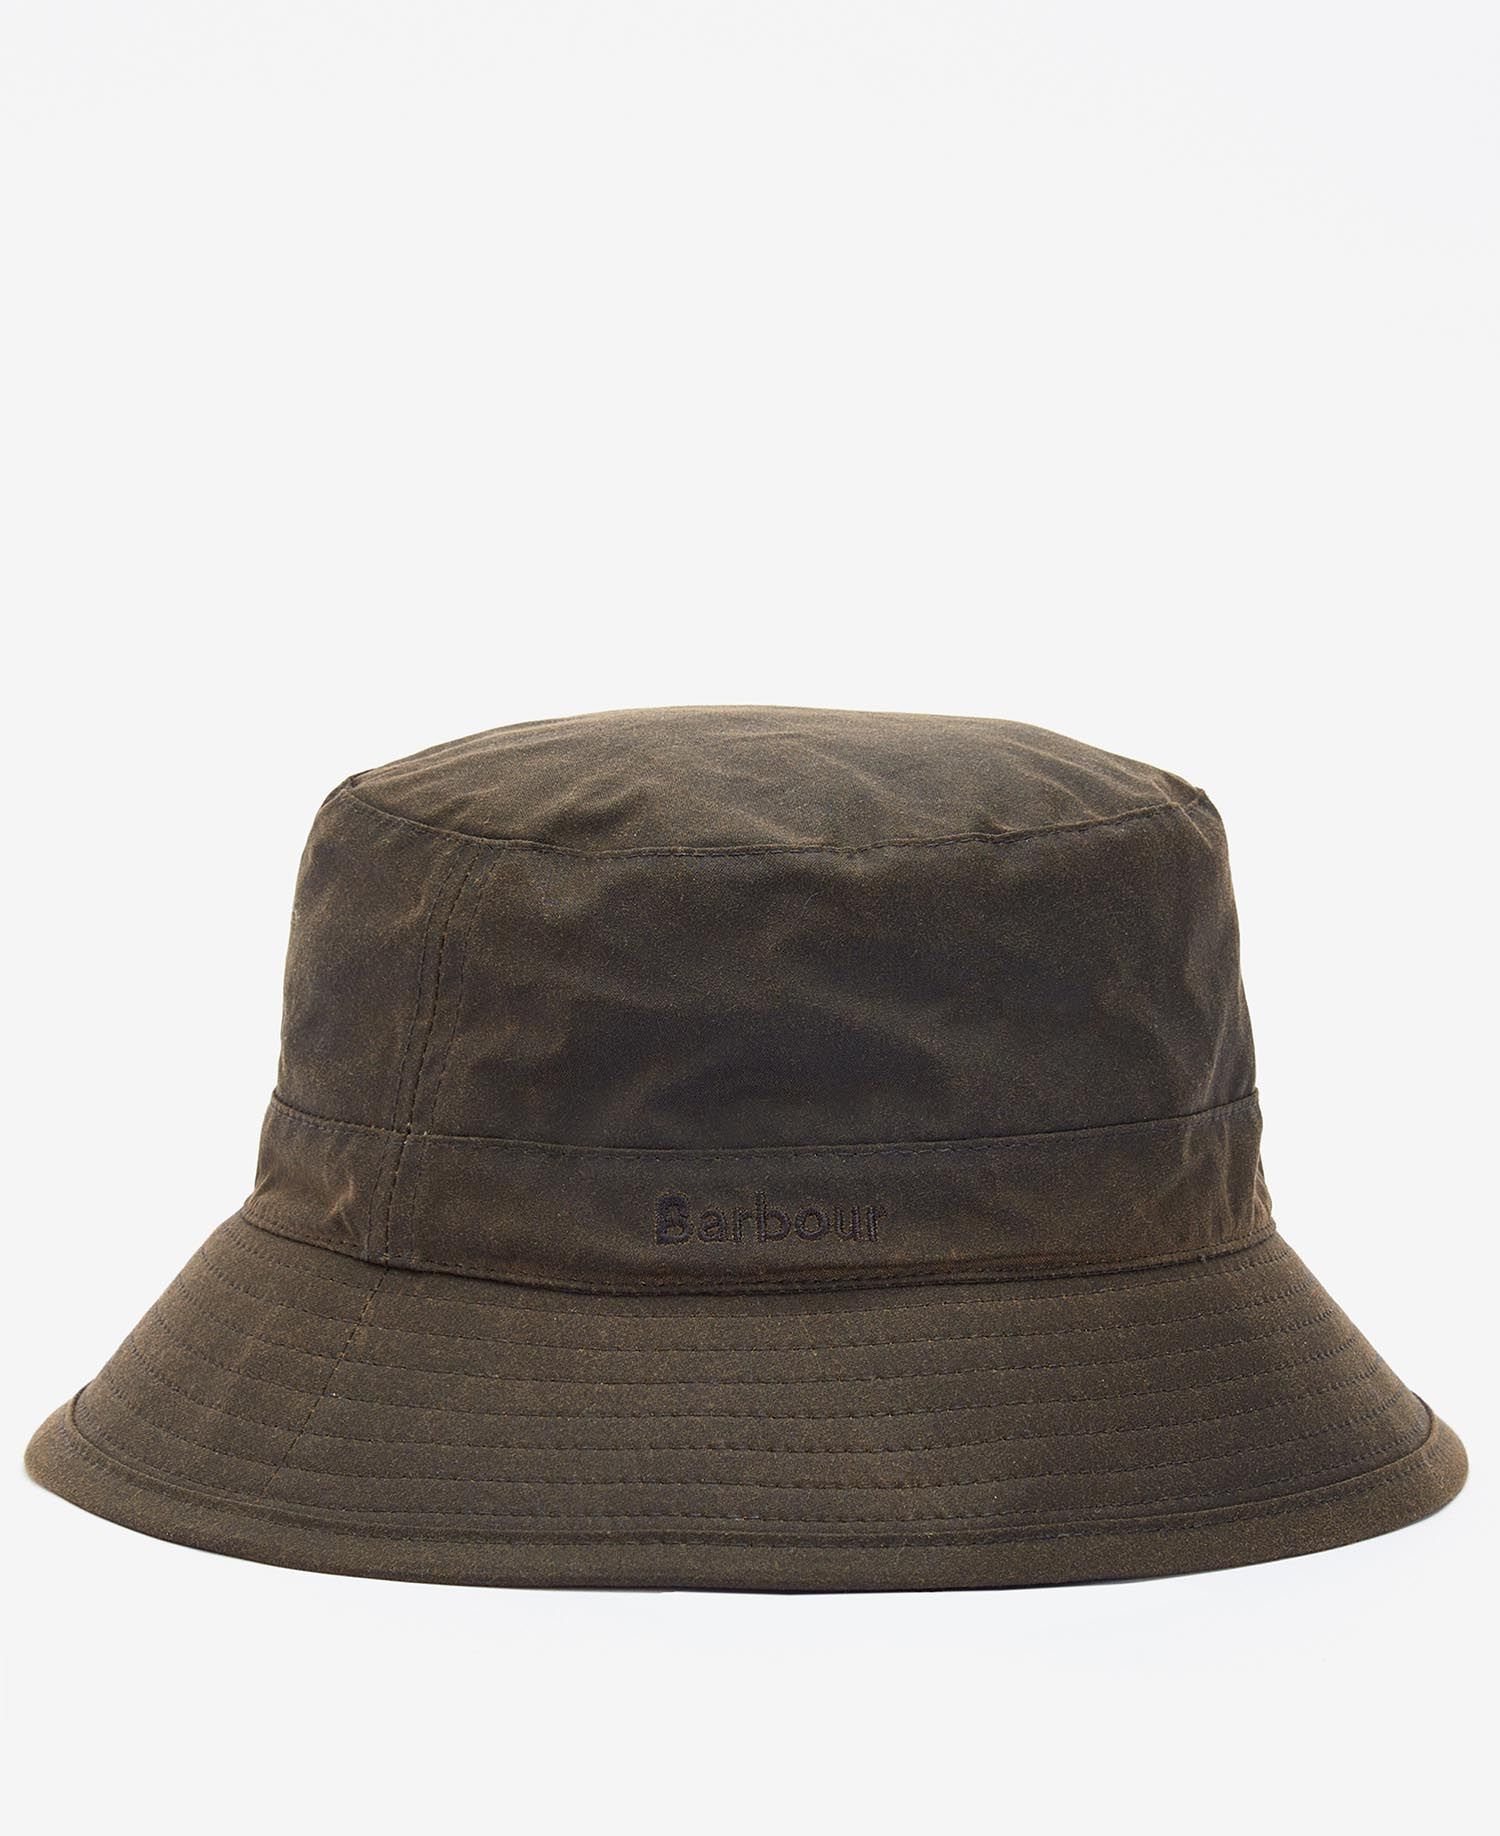 Barbour Wax Sports Hat in Olive | Barbour